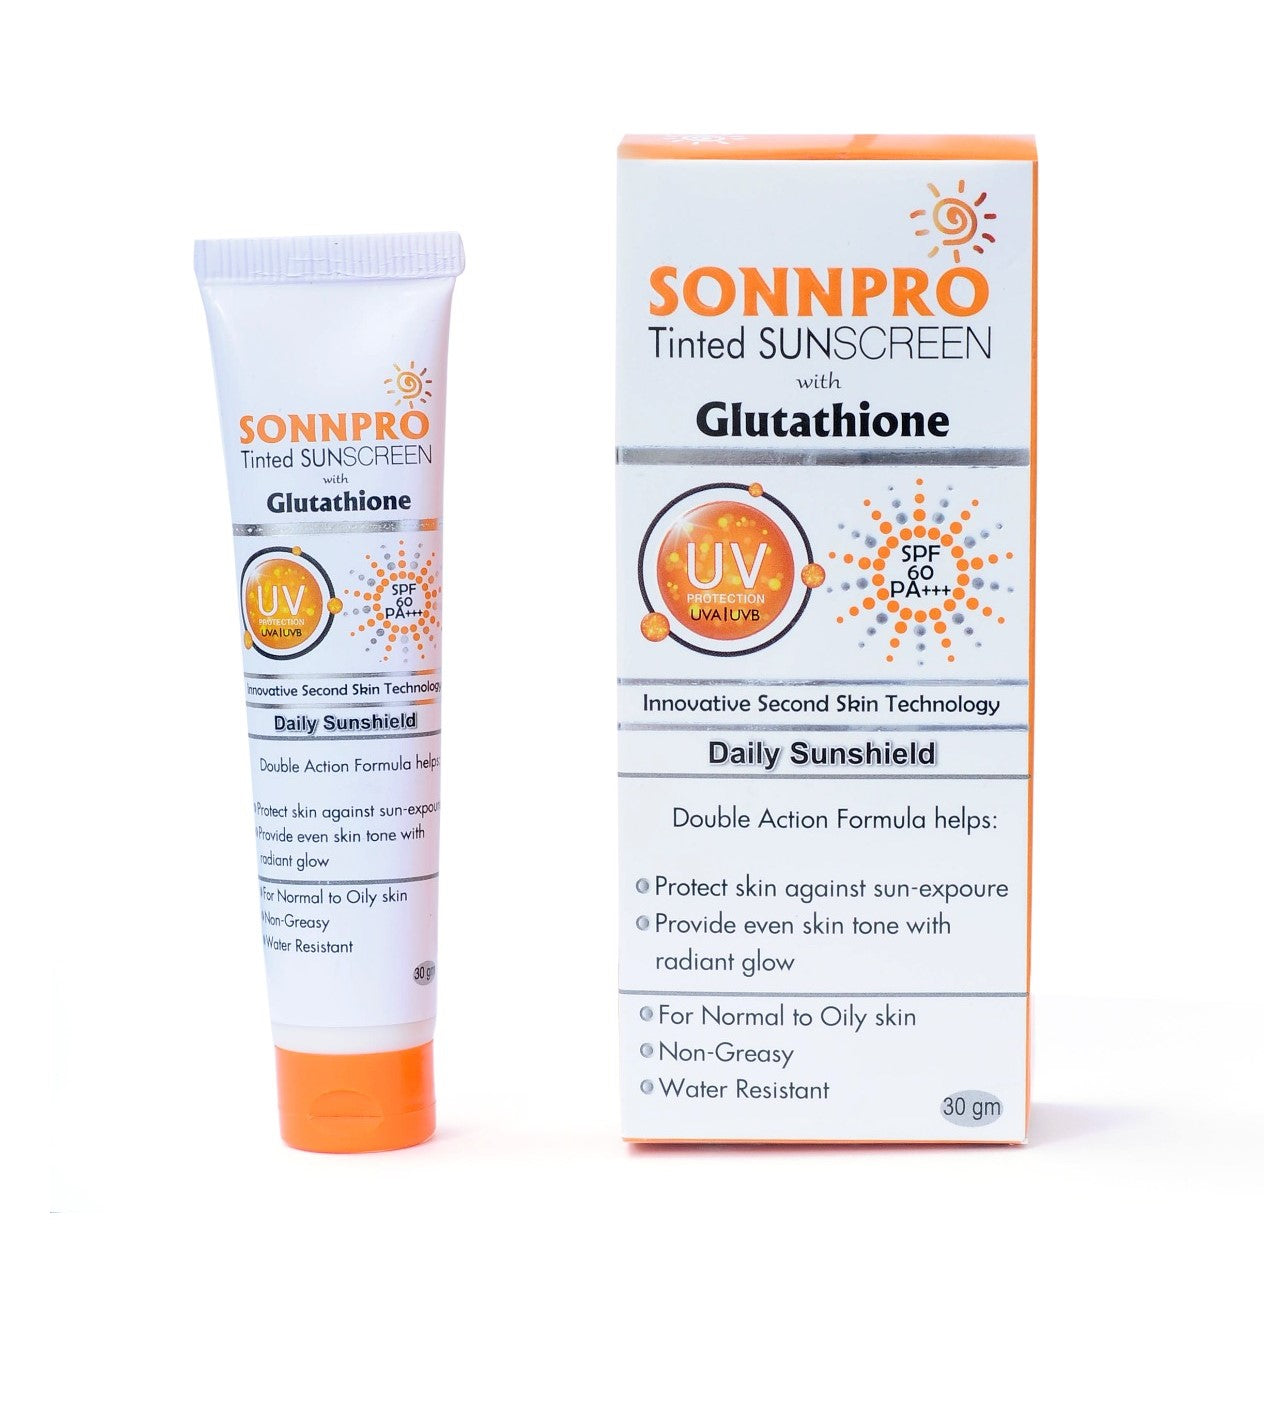 SONNPRO Tinted Sunscreen with Glutathione 30gms